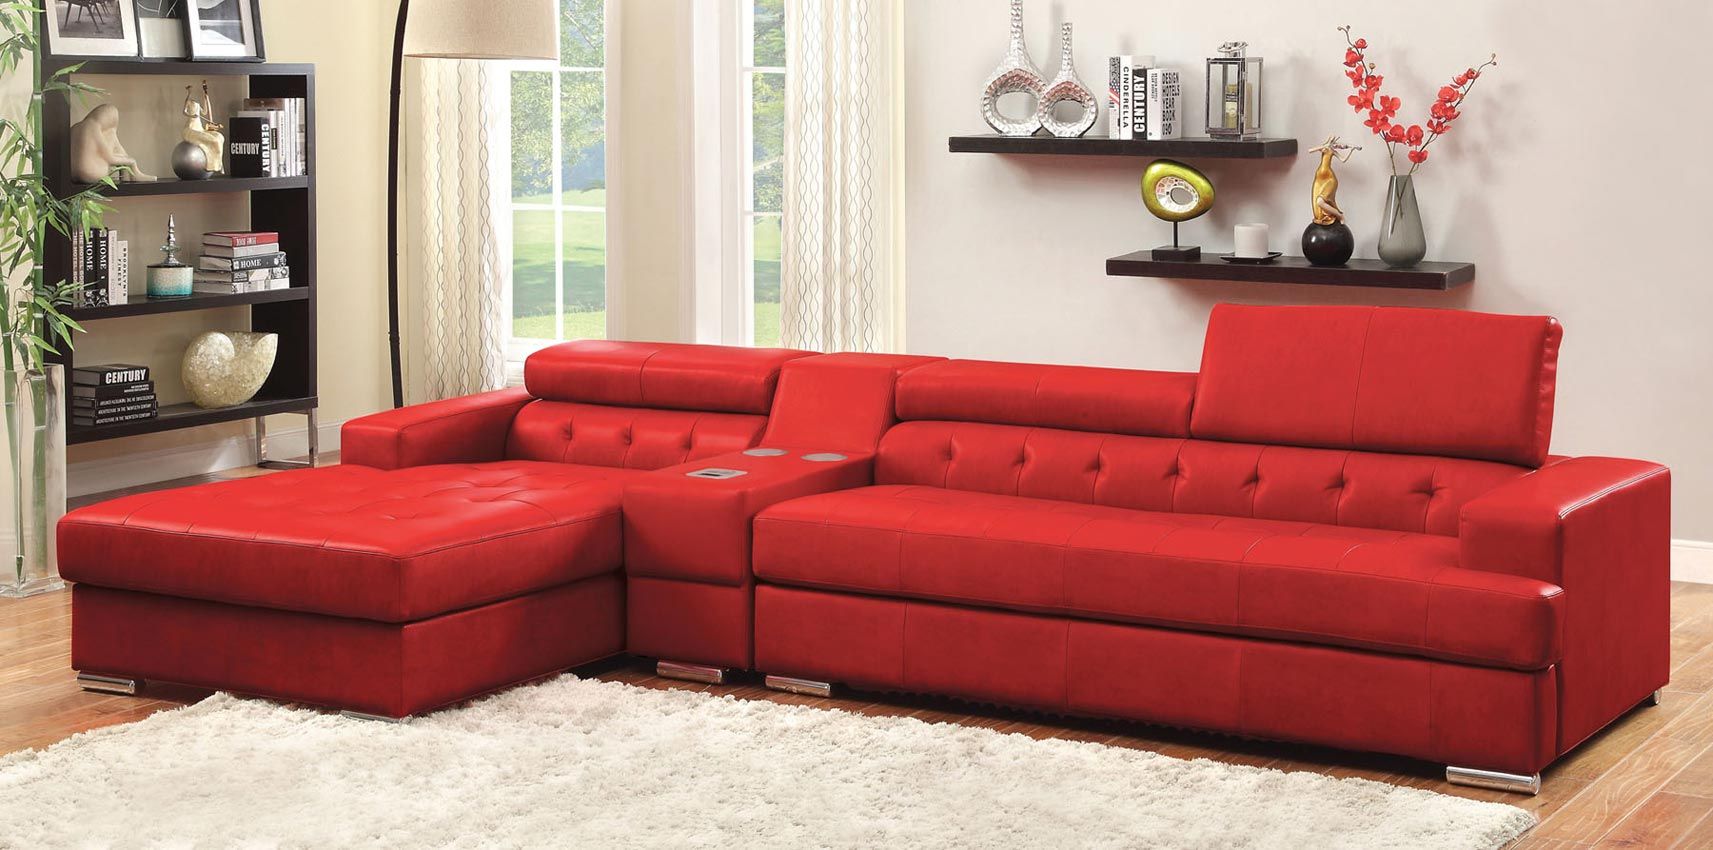 3 Pcs Red Leather Sofa Set With Console Within Red Sofas (View 4 of 15)